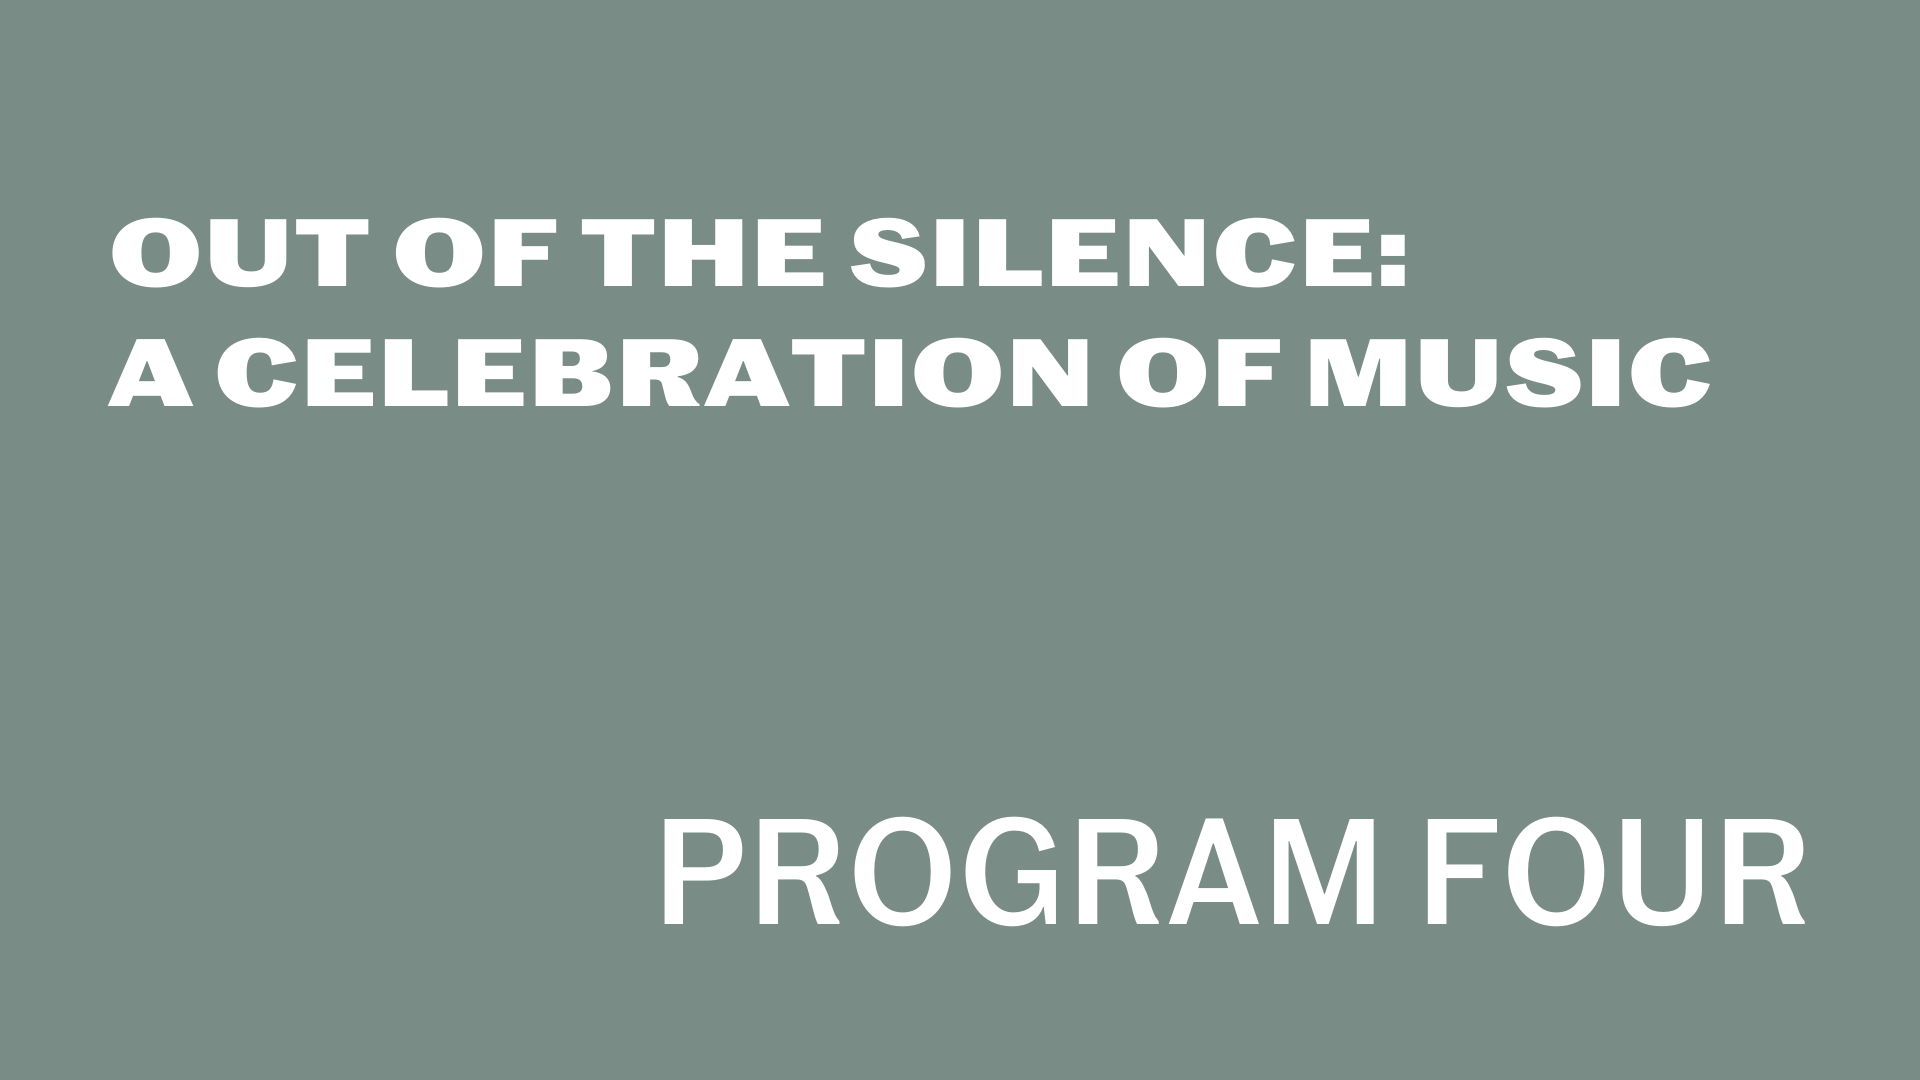 Visit https://fishercenter.bard.edu/events/out-of-the-silence-4/